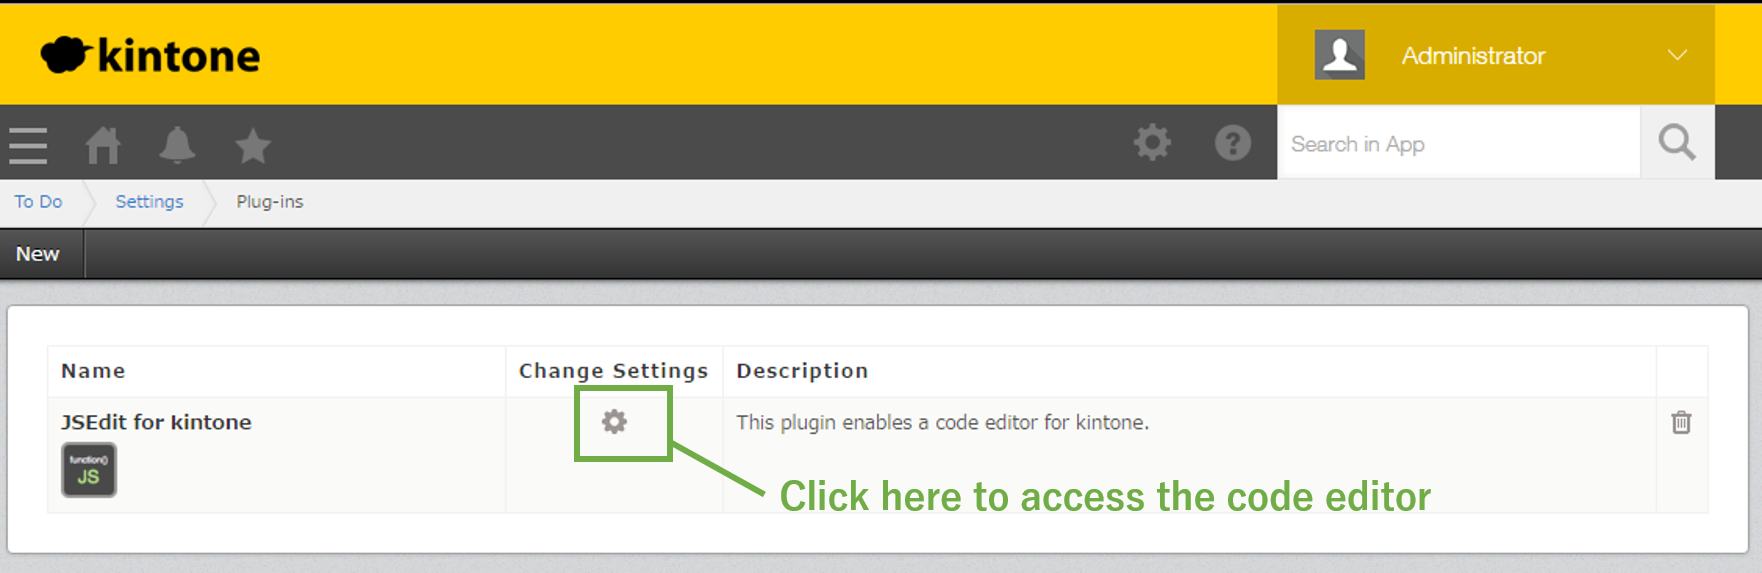 Screenshot: The plug-ins settings of the Kintone App, showing how to access the settings of the plug-in.